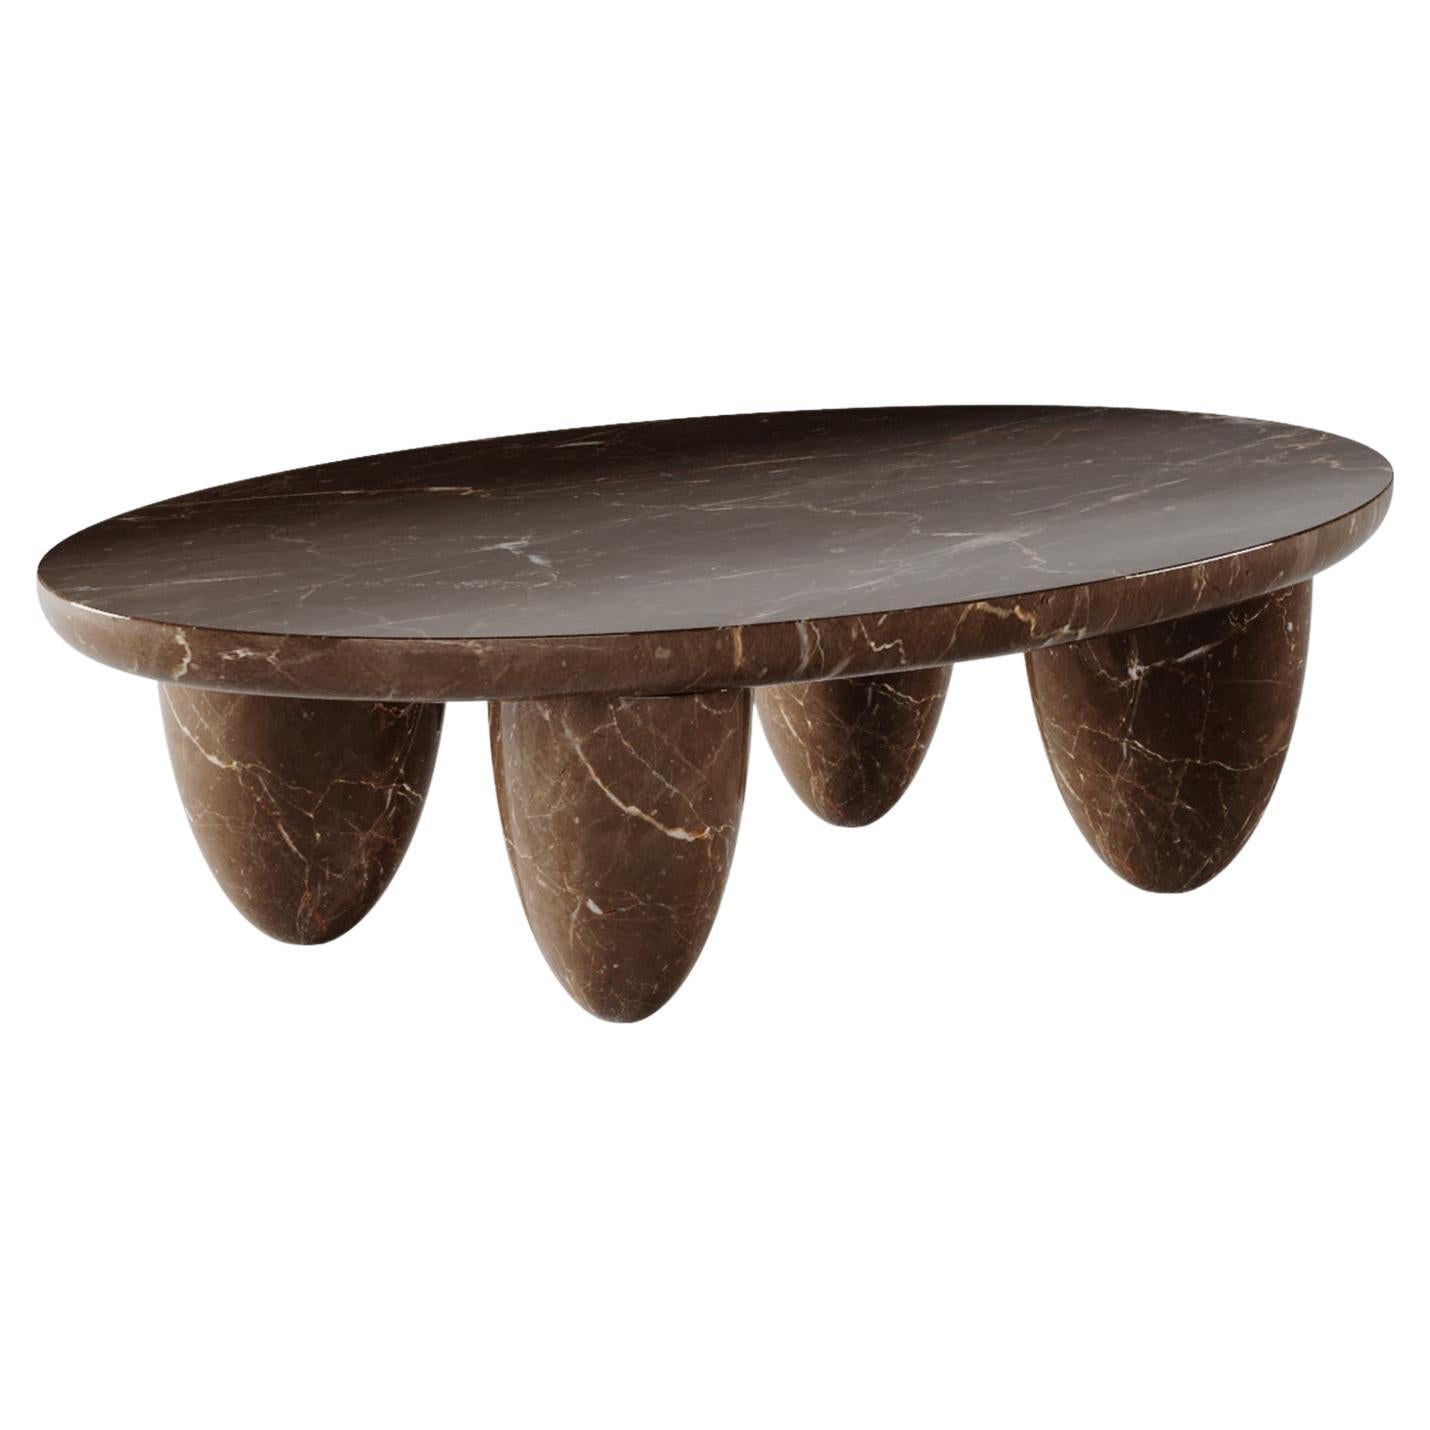 Modern Minimal Indoor Outdoor Round Coffee Center Table in Olive Marron Marble